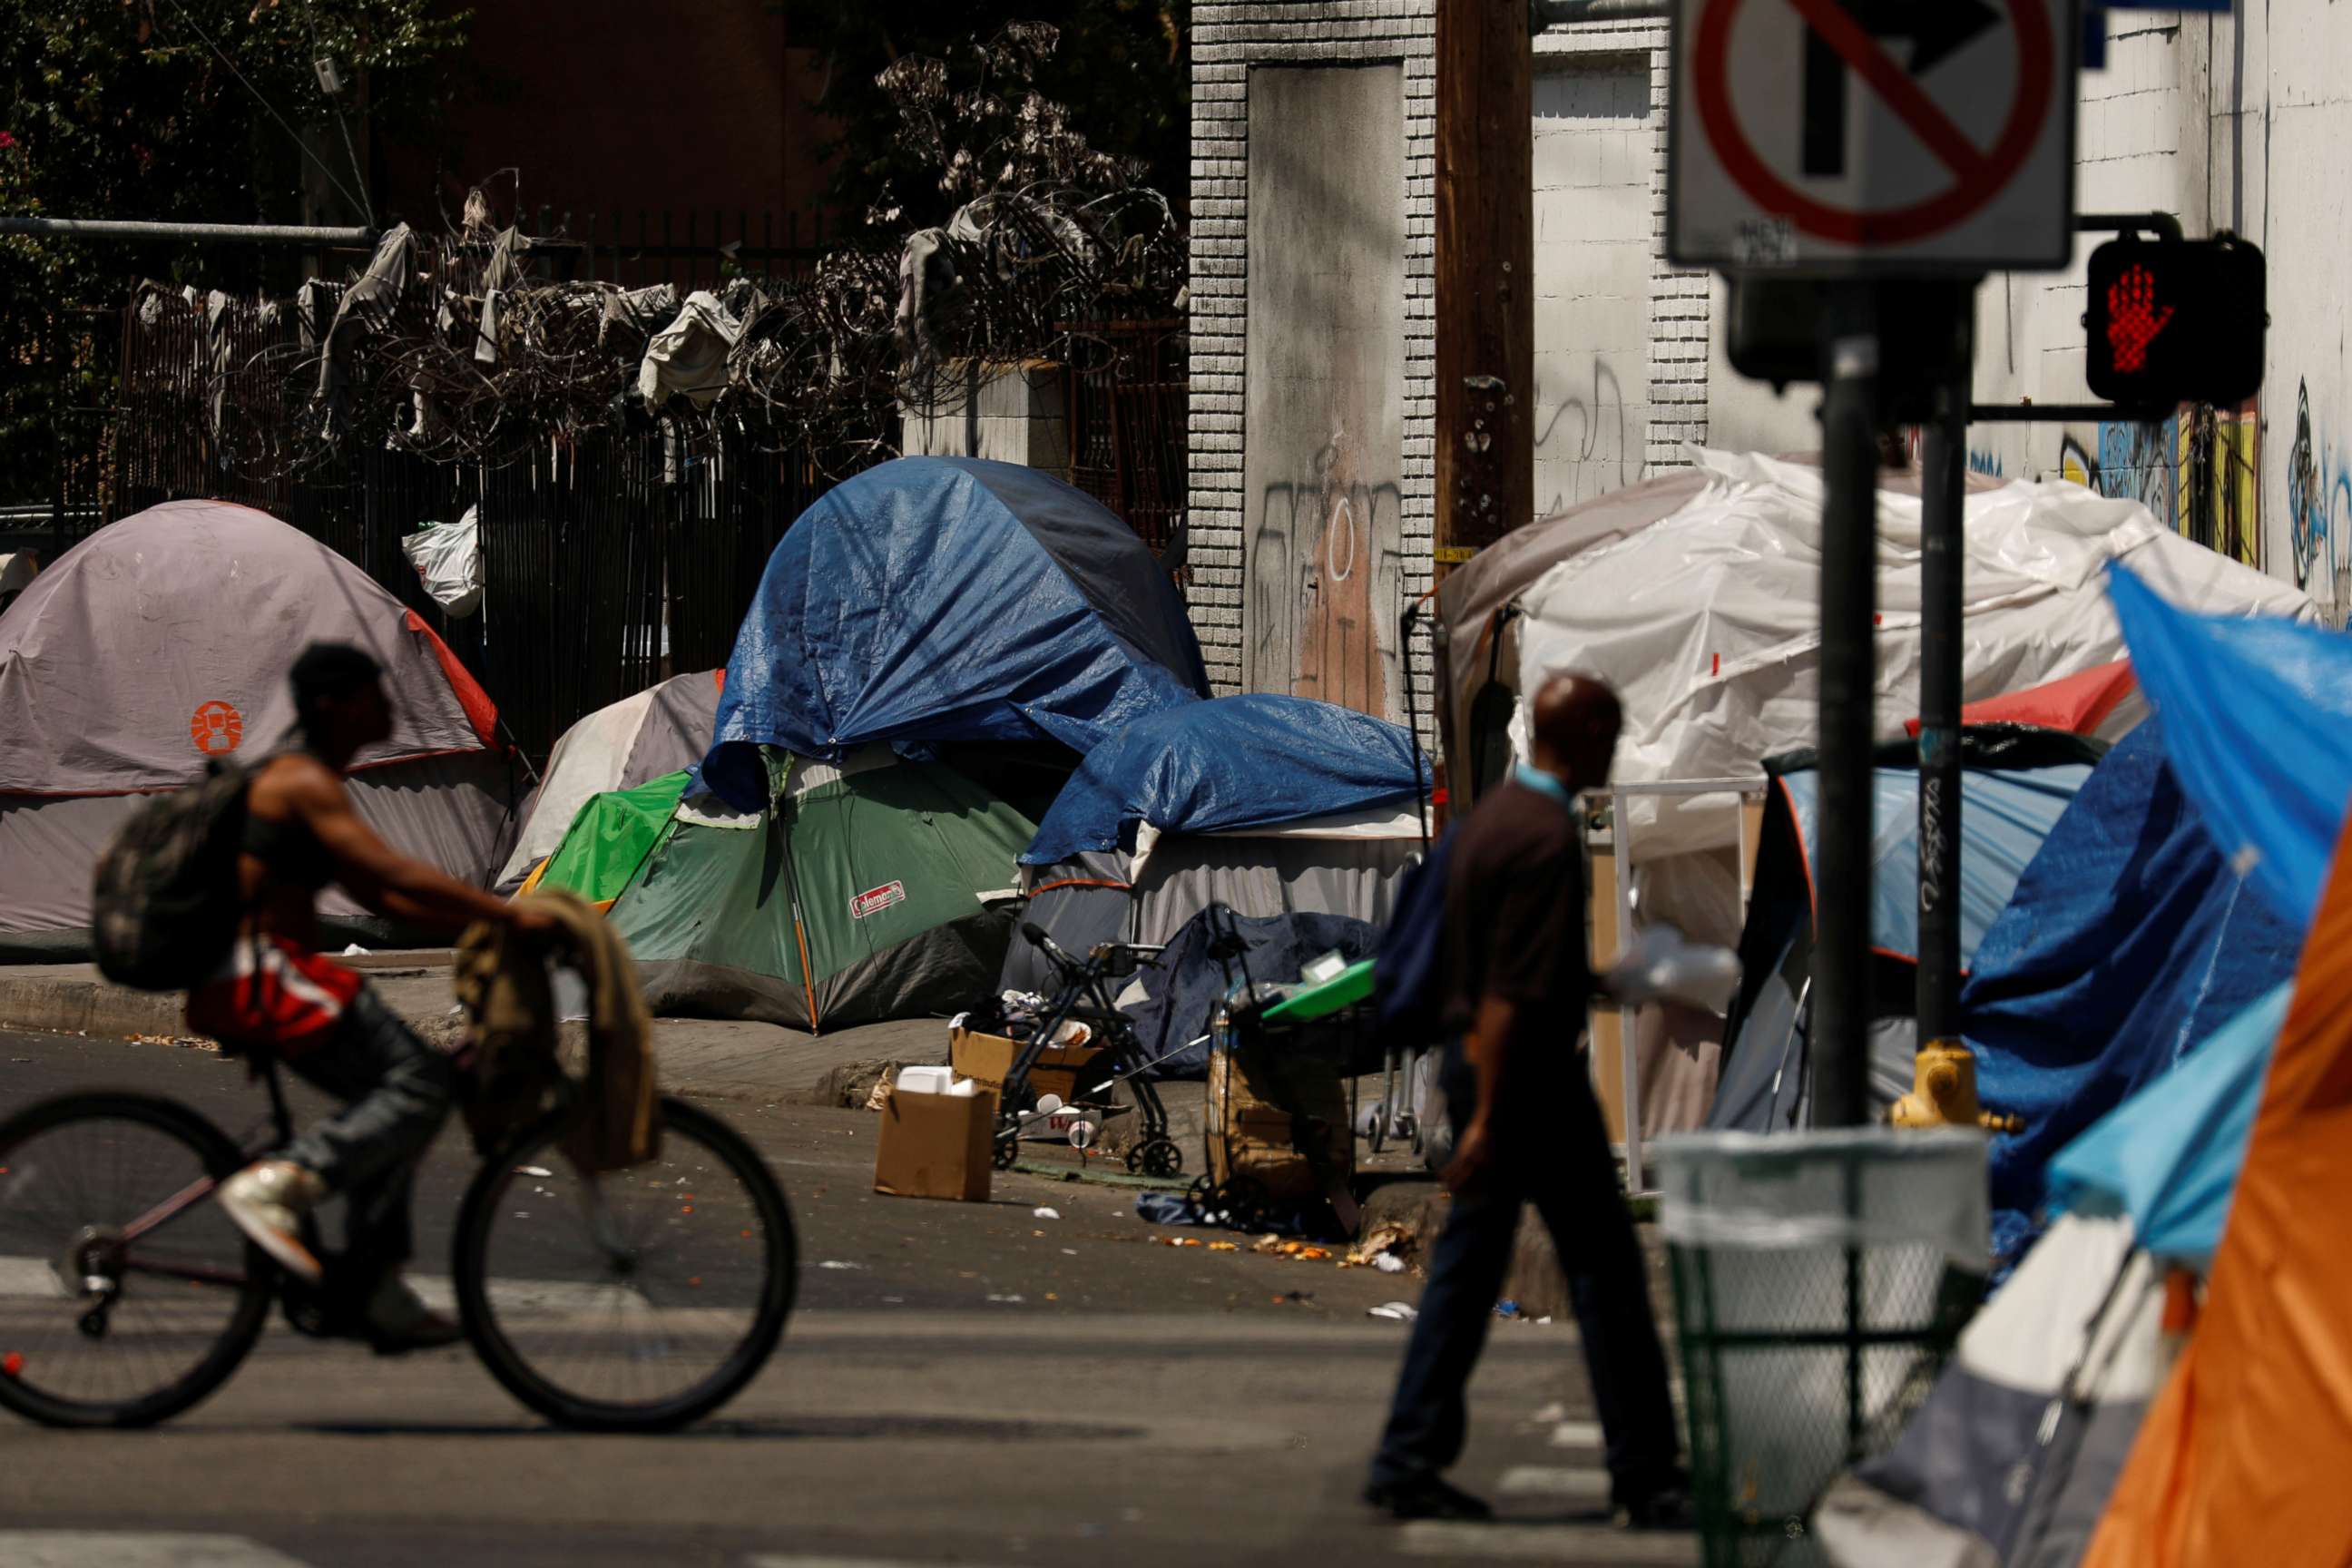 PHOTO: Tents and tarps erected by homeless people are shown along sidewalks and streets in the skid row area of downtown Los Angeles, June 28, 2019.